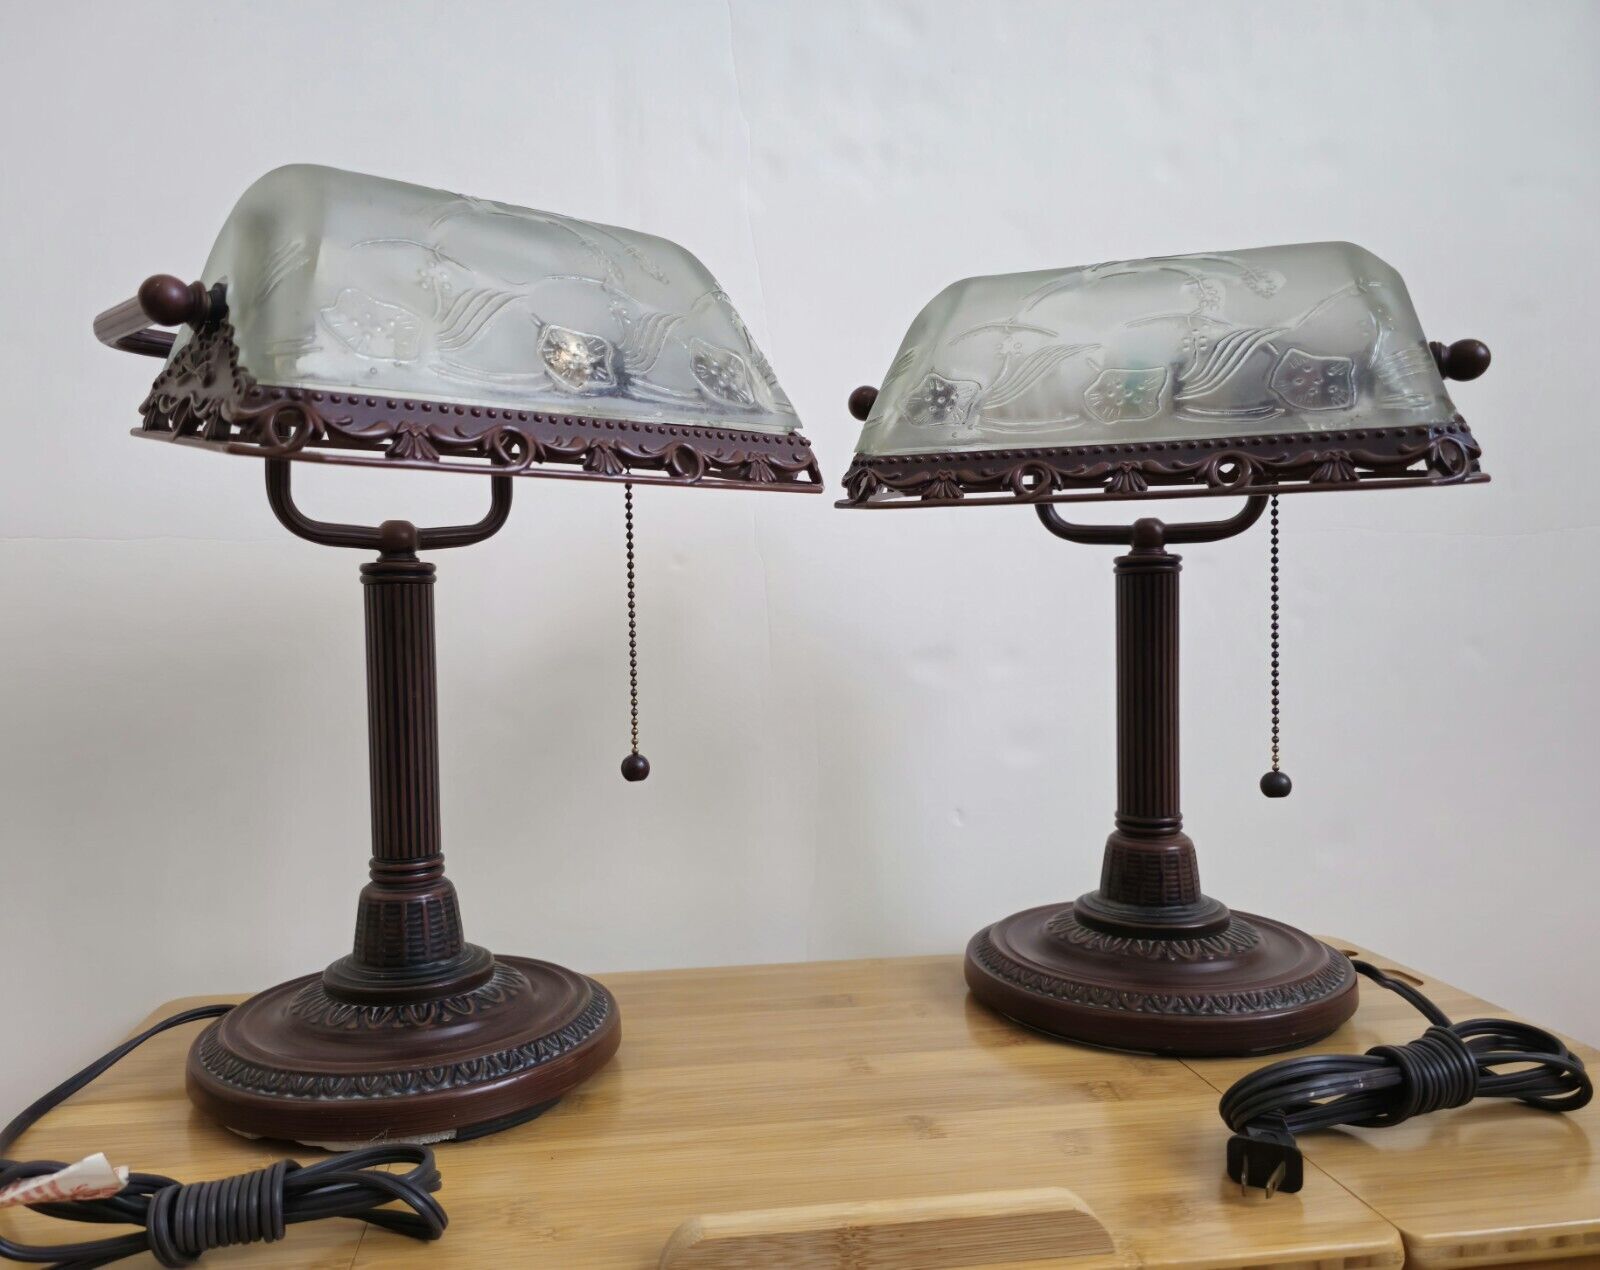 2 Vintage Bronze Bankers Lamps Frost Etched Glass Antique Style Desk Lamp.